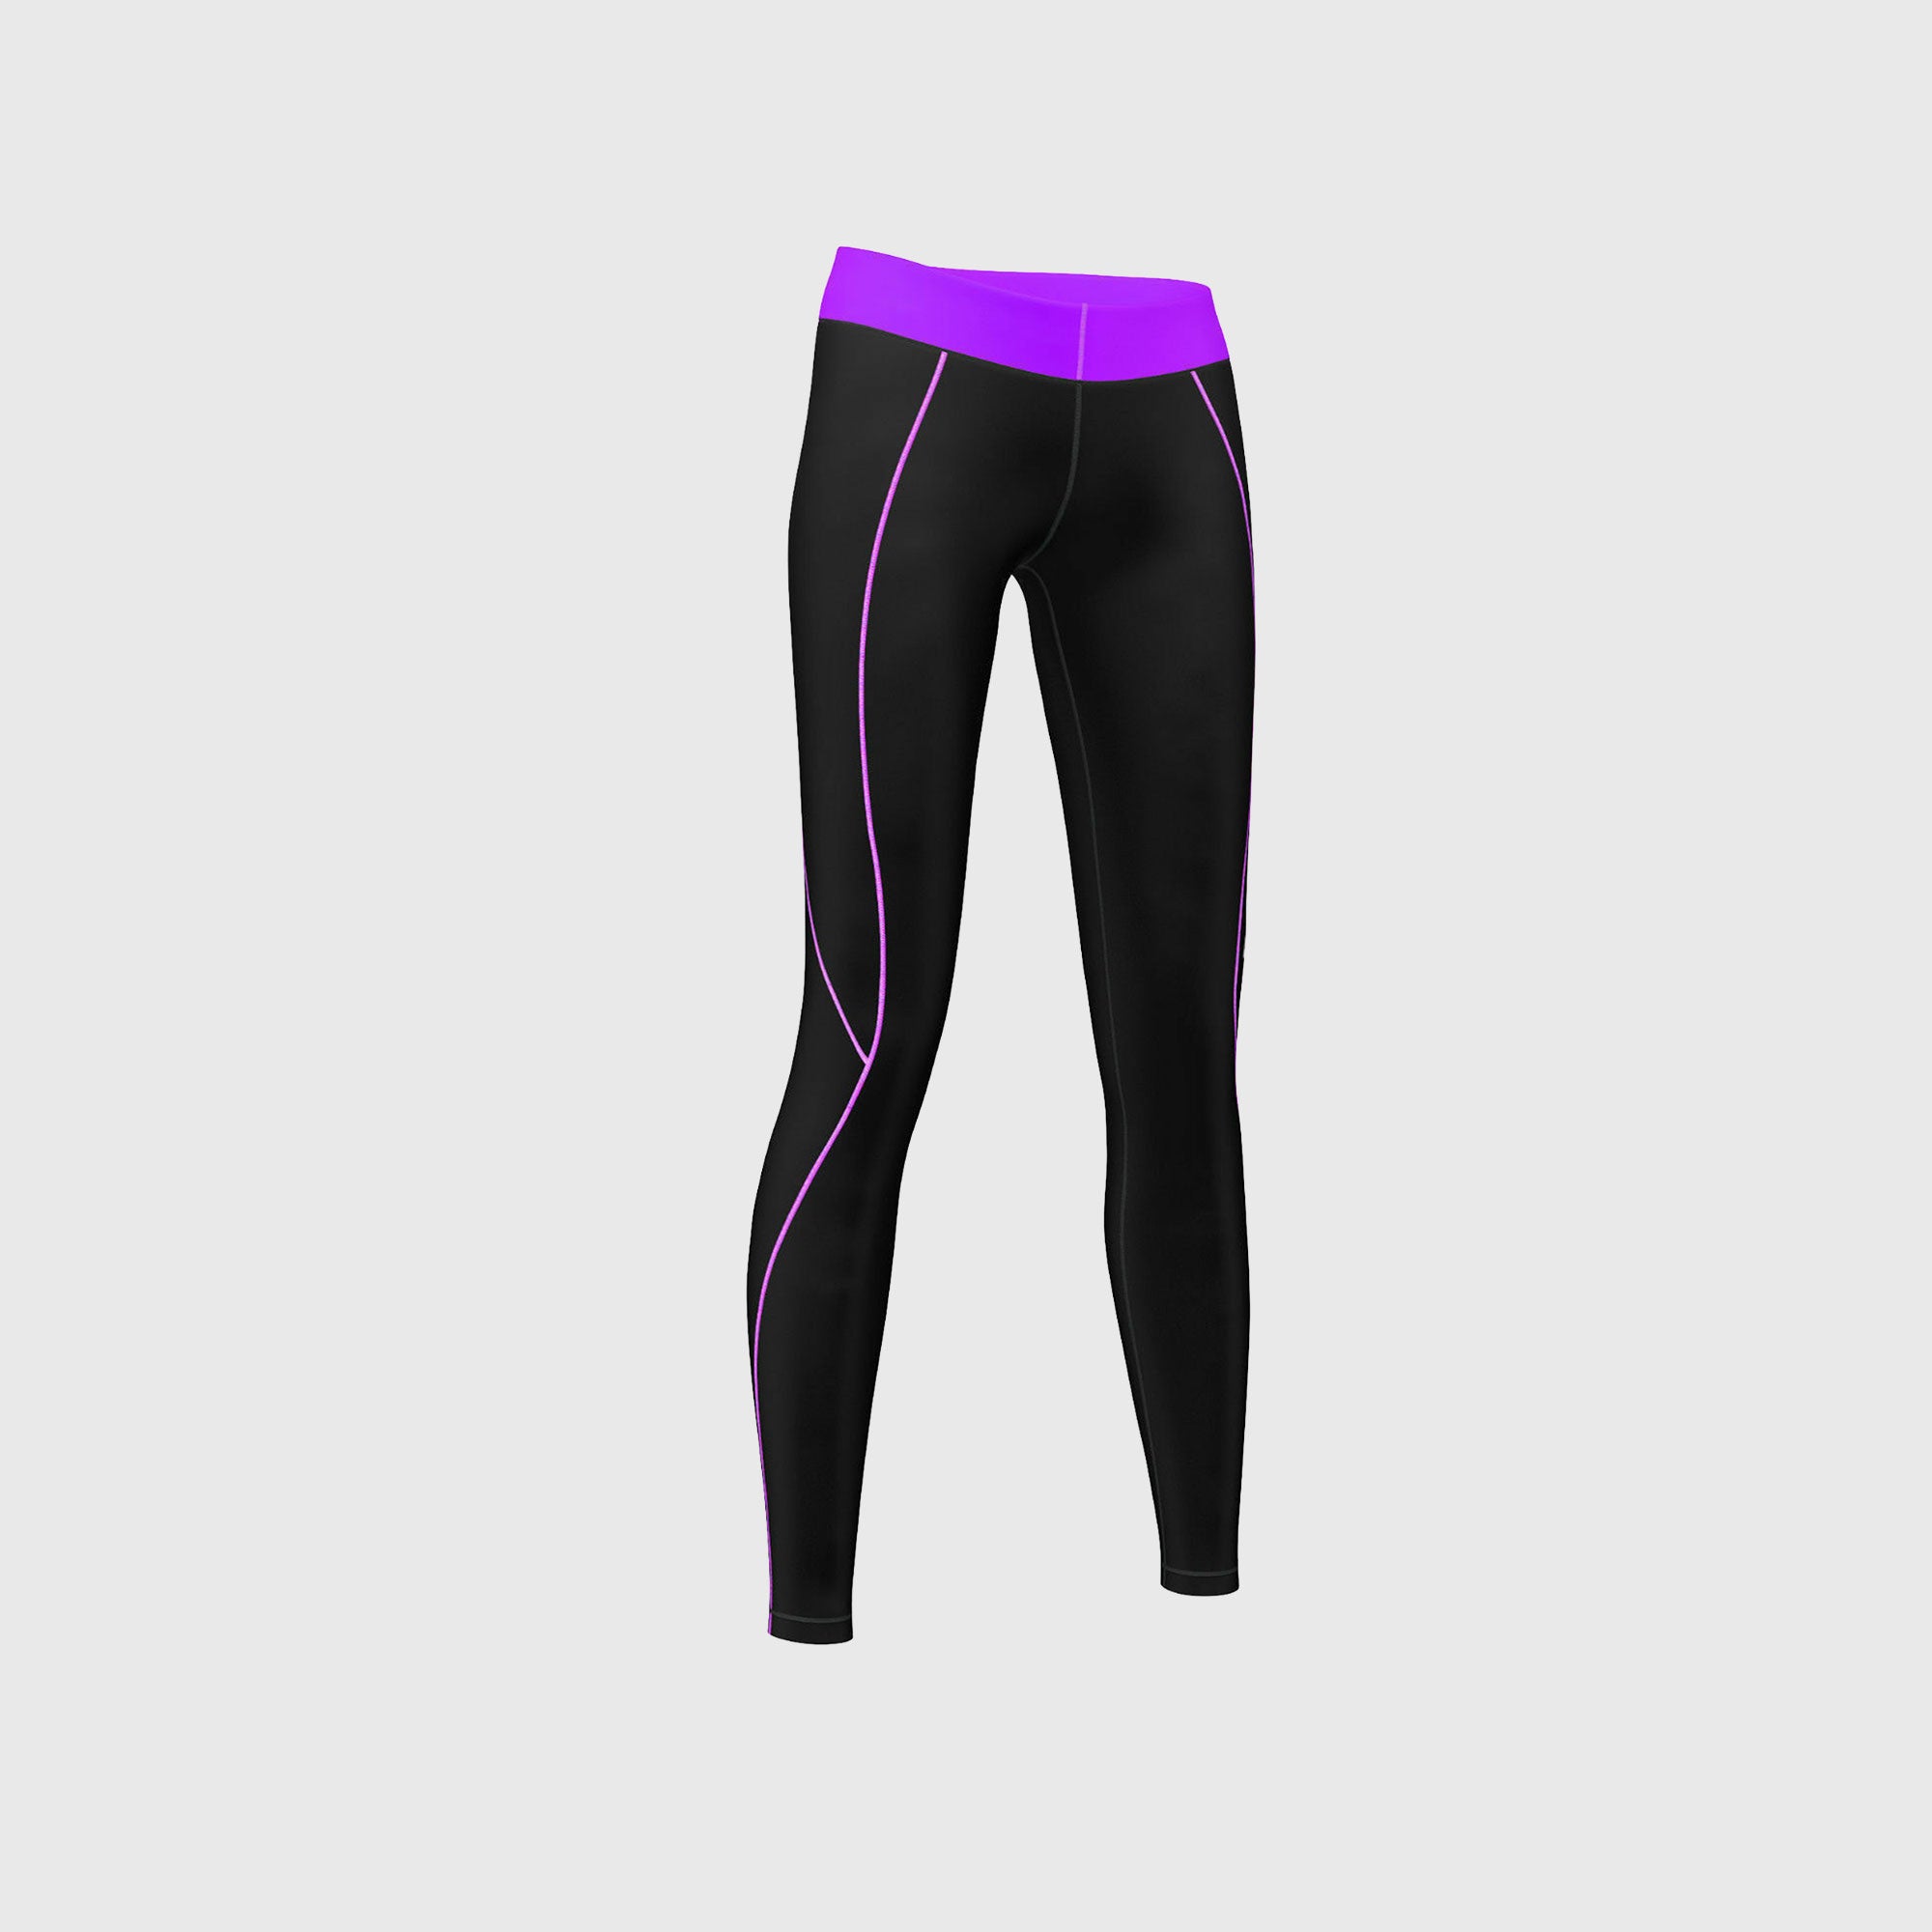 Fdx Black & Purple Compression Tights Leggings Gym Workout Running Athletic Yoga Elastic Waistband Stretchable Breathable Training Jogging Pants - Monarch